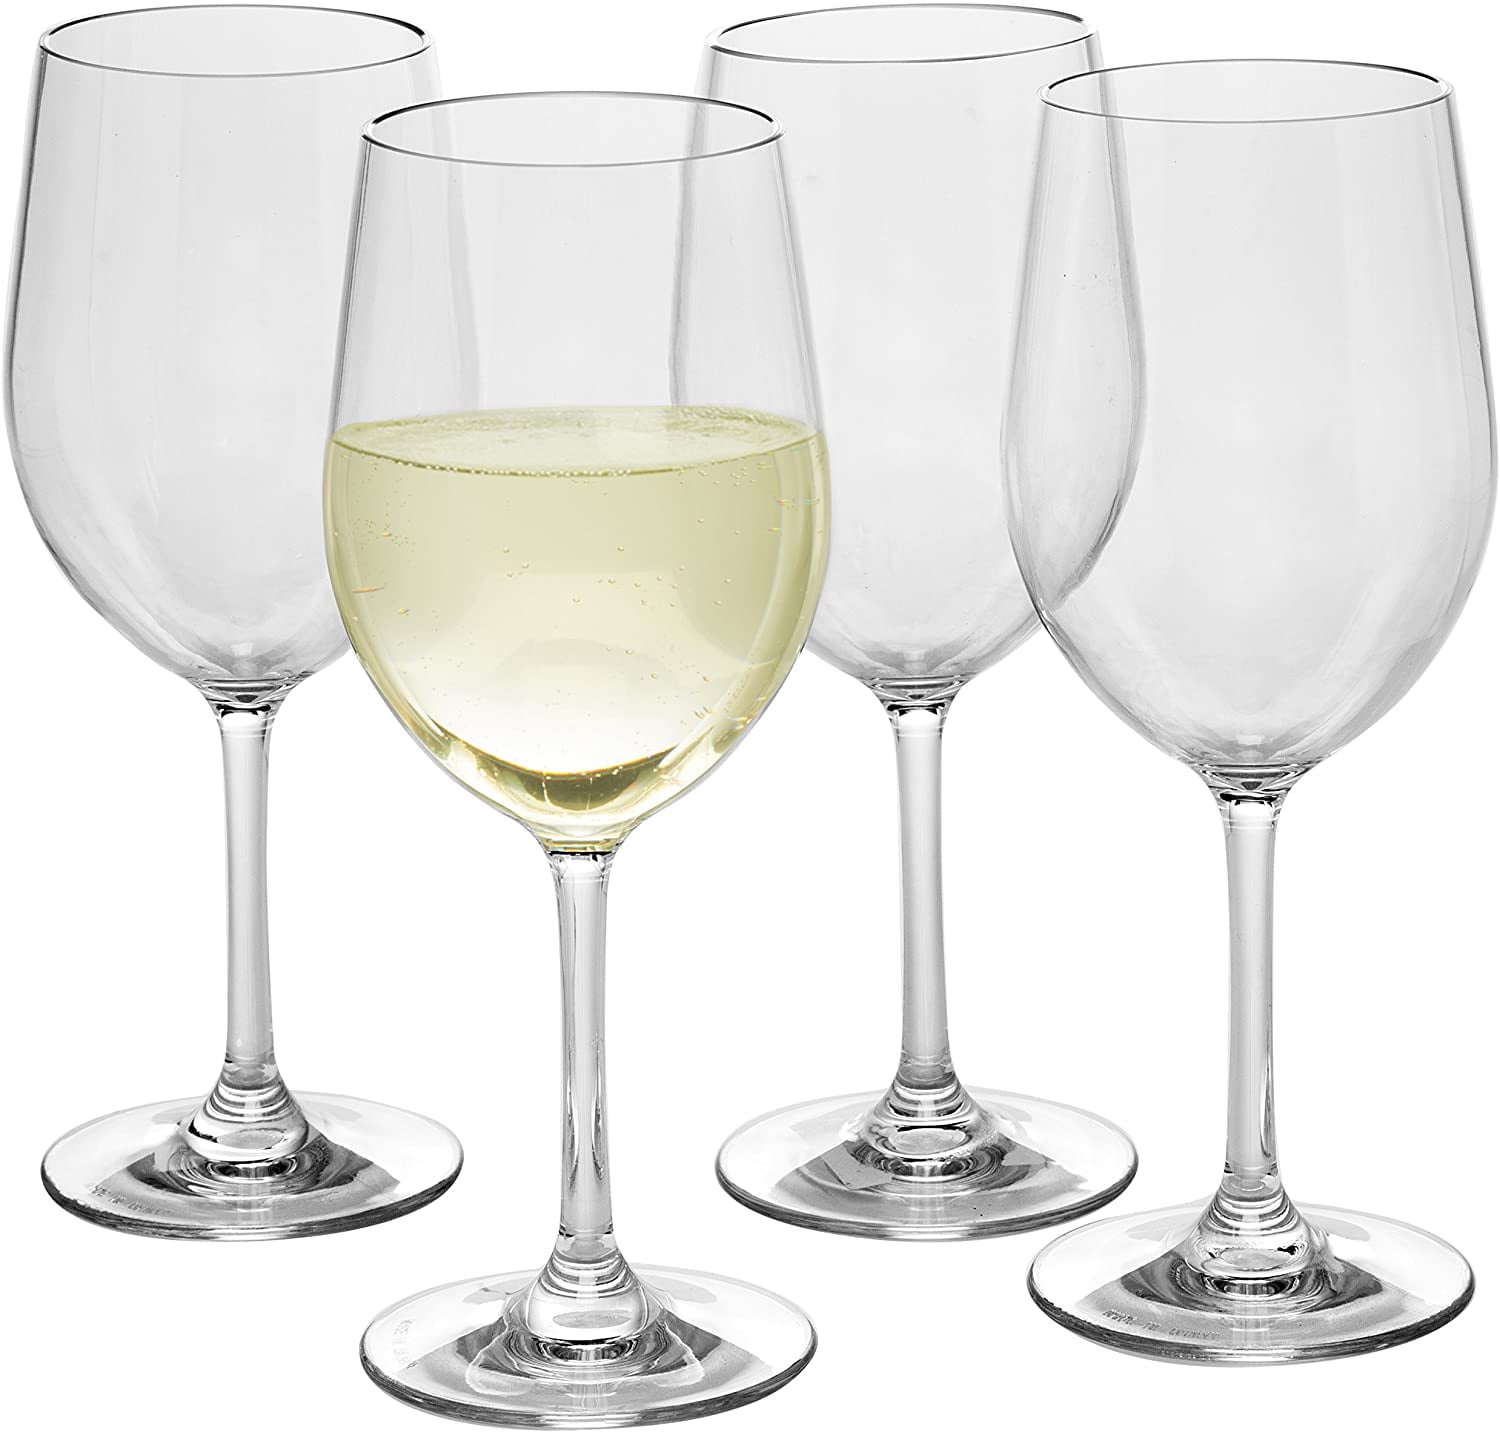 HAKEEMI Fully Tempered Wine Glasses set of 8, 15.5 oz Durable Red Wine  Glasses for Wedding, Party, Dishwasher Safe